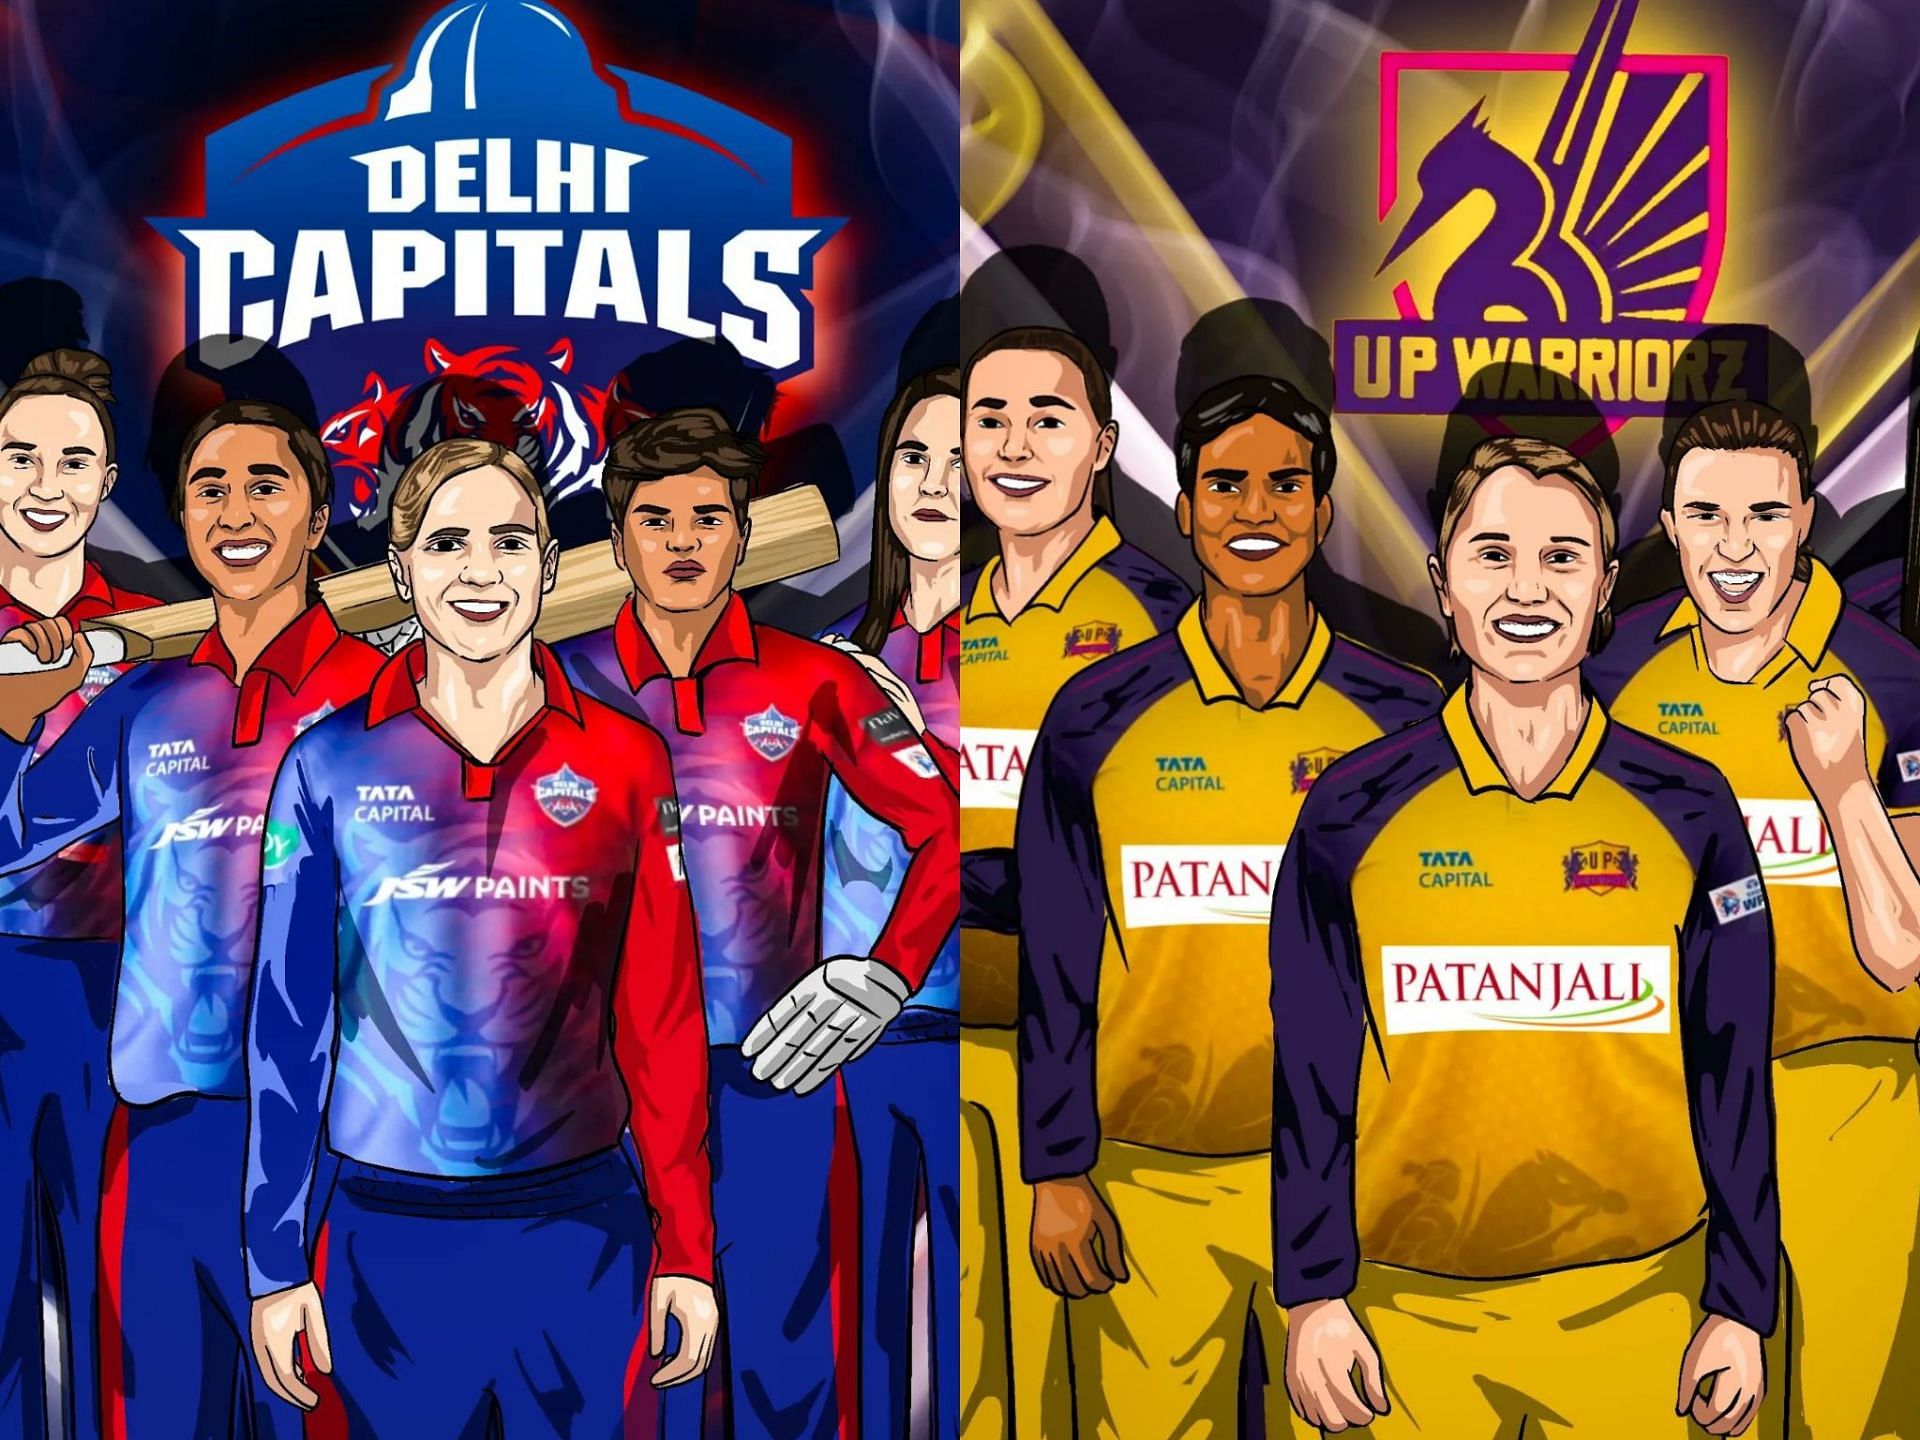 Delhi Capitals will take on UP Warriorz in Match 5 of the WPL 2023 [Pic Credit: Sportskeeda]